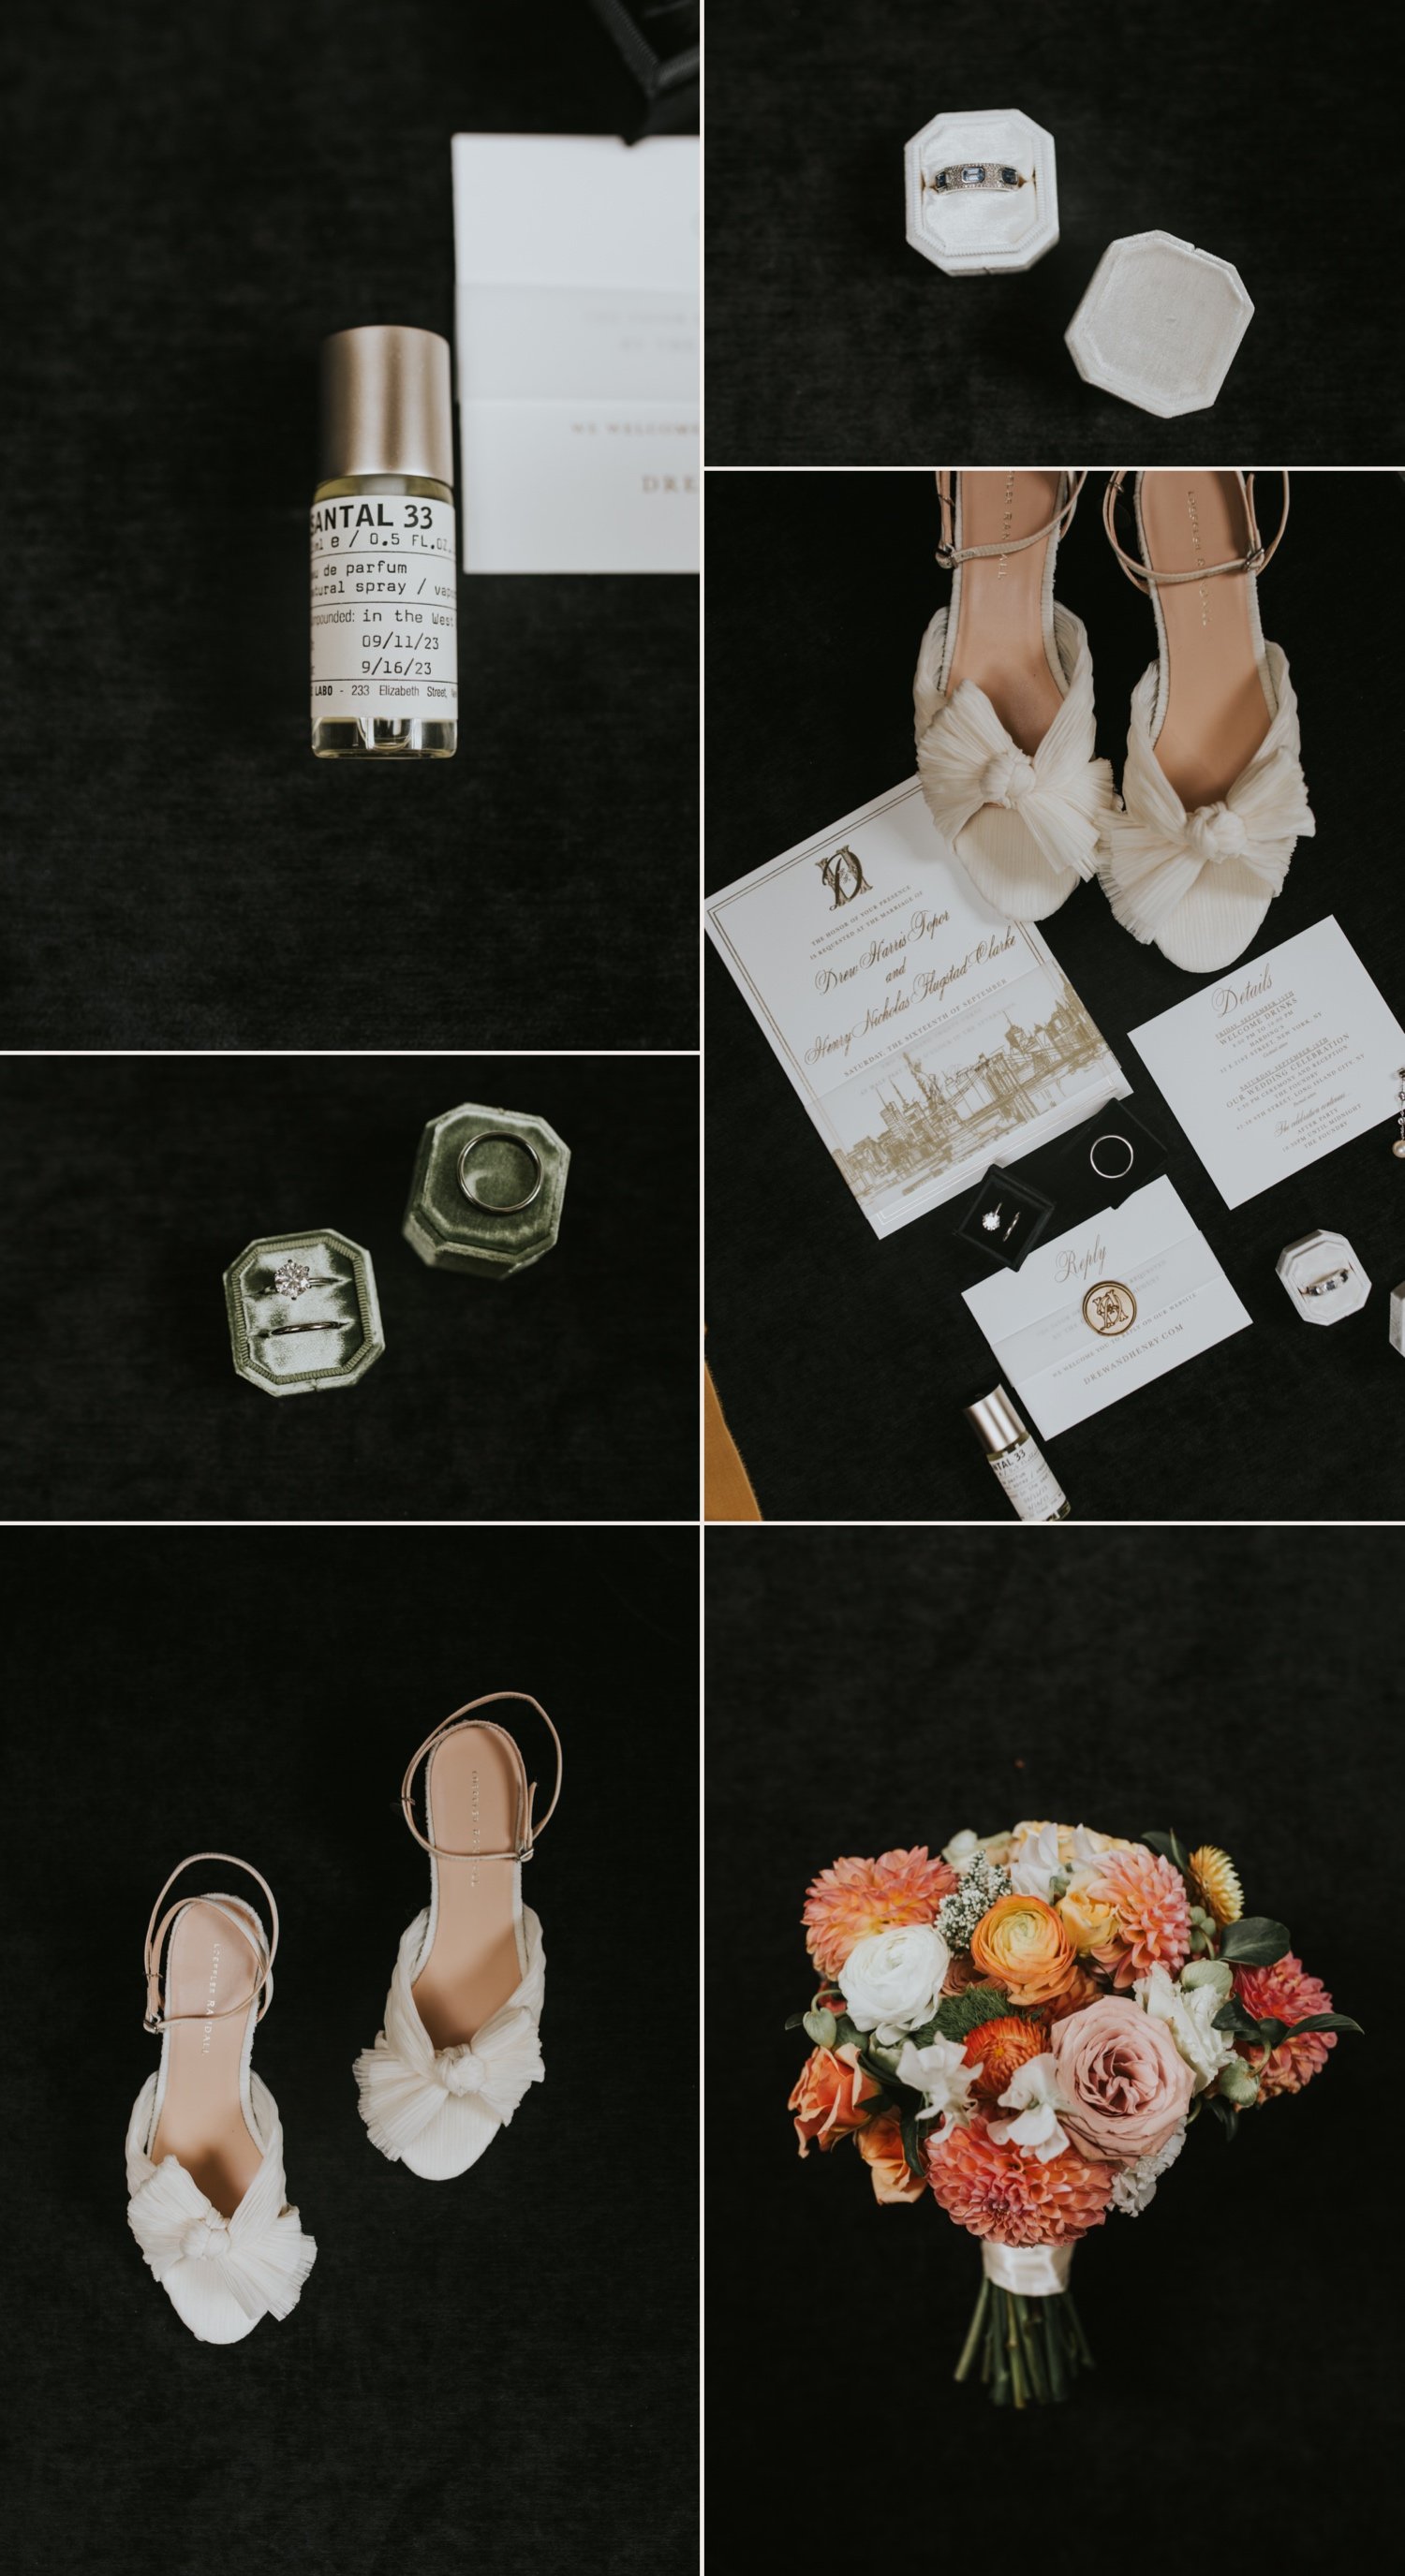 Hudson Valley Wedding Photographer, The Foundry LIC Wedding, The Foundry Wedding, Wedding Flat Lay, Wedding Details, Bride Getting Ready 